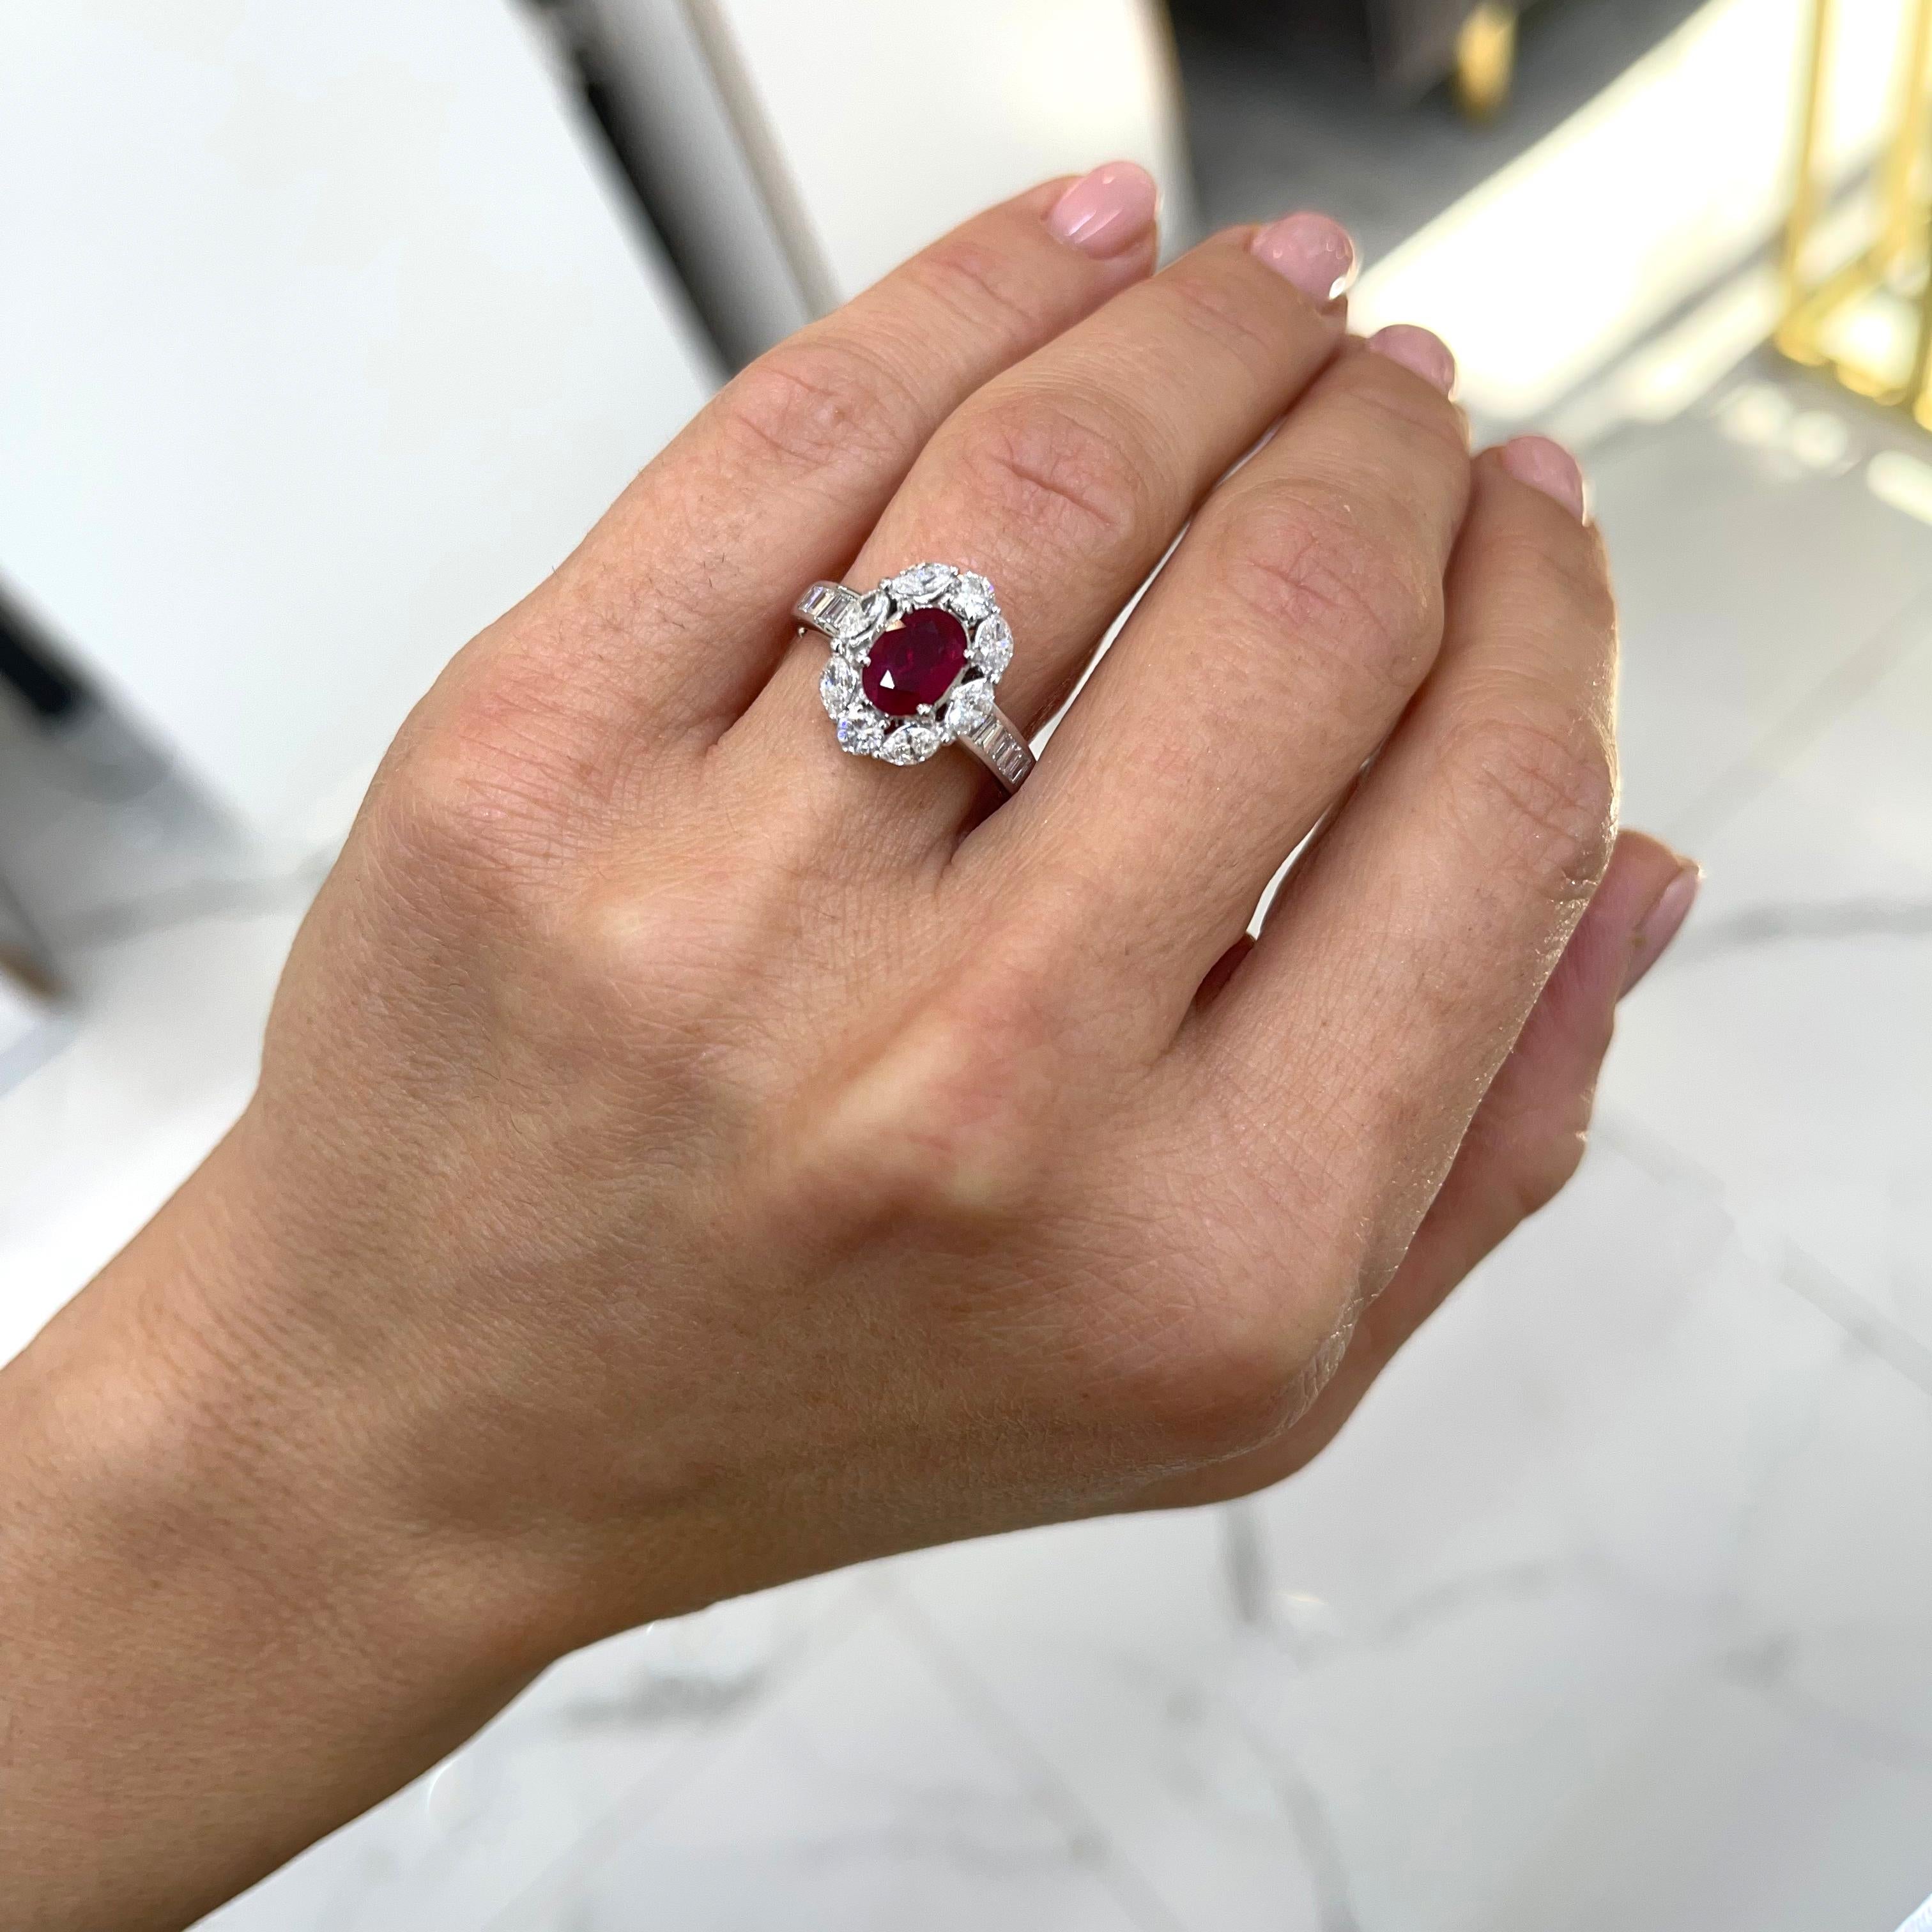 Ladies Vintage 18K White Gold 1.04ct. Gia Oval Ruby Halo Diamond Cocktail Ring For Sale 3